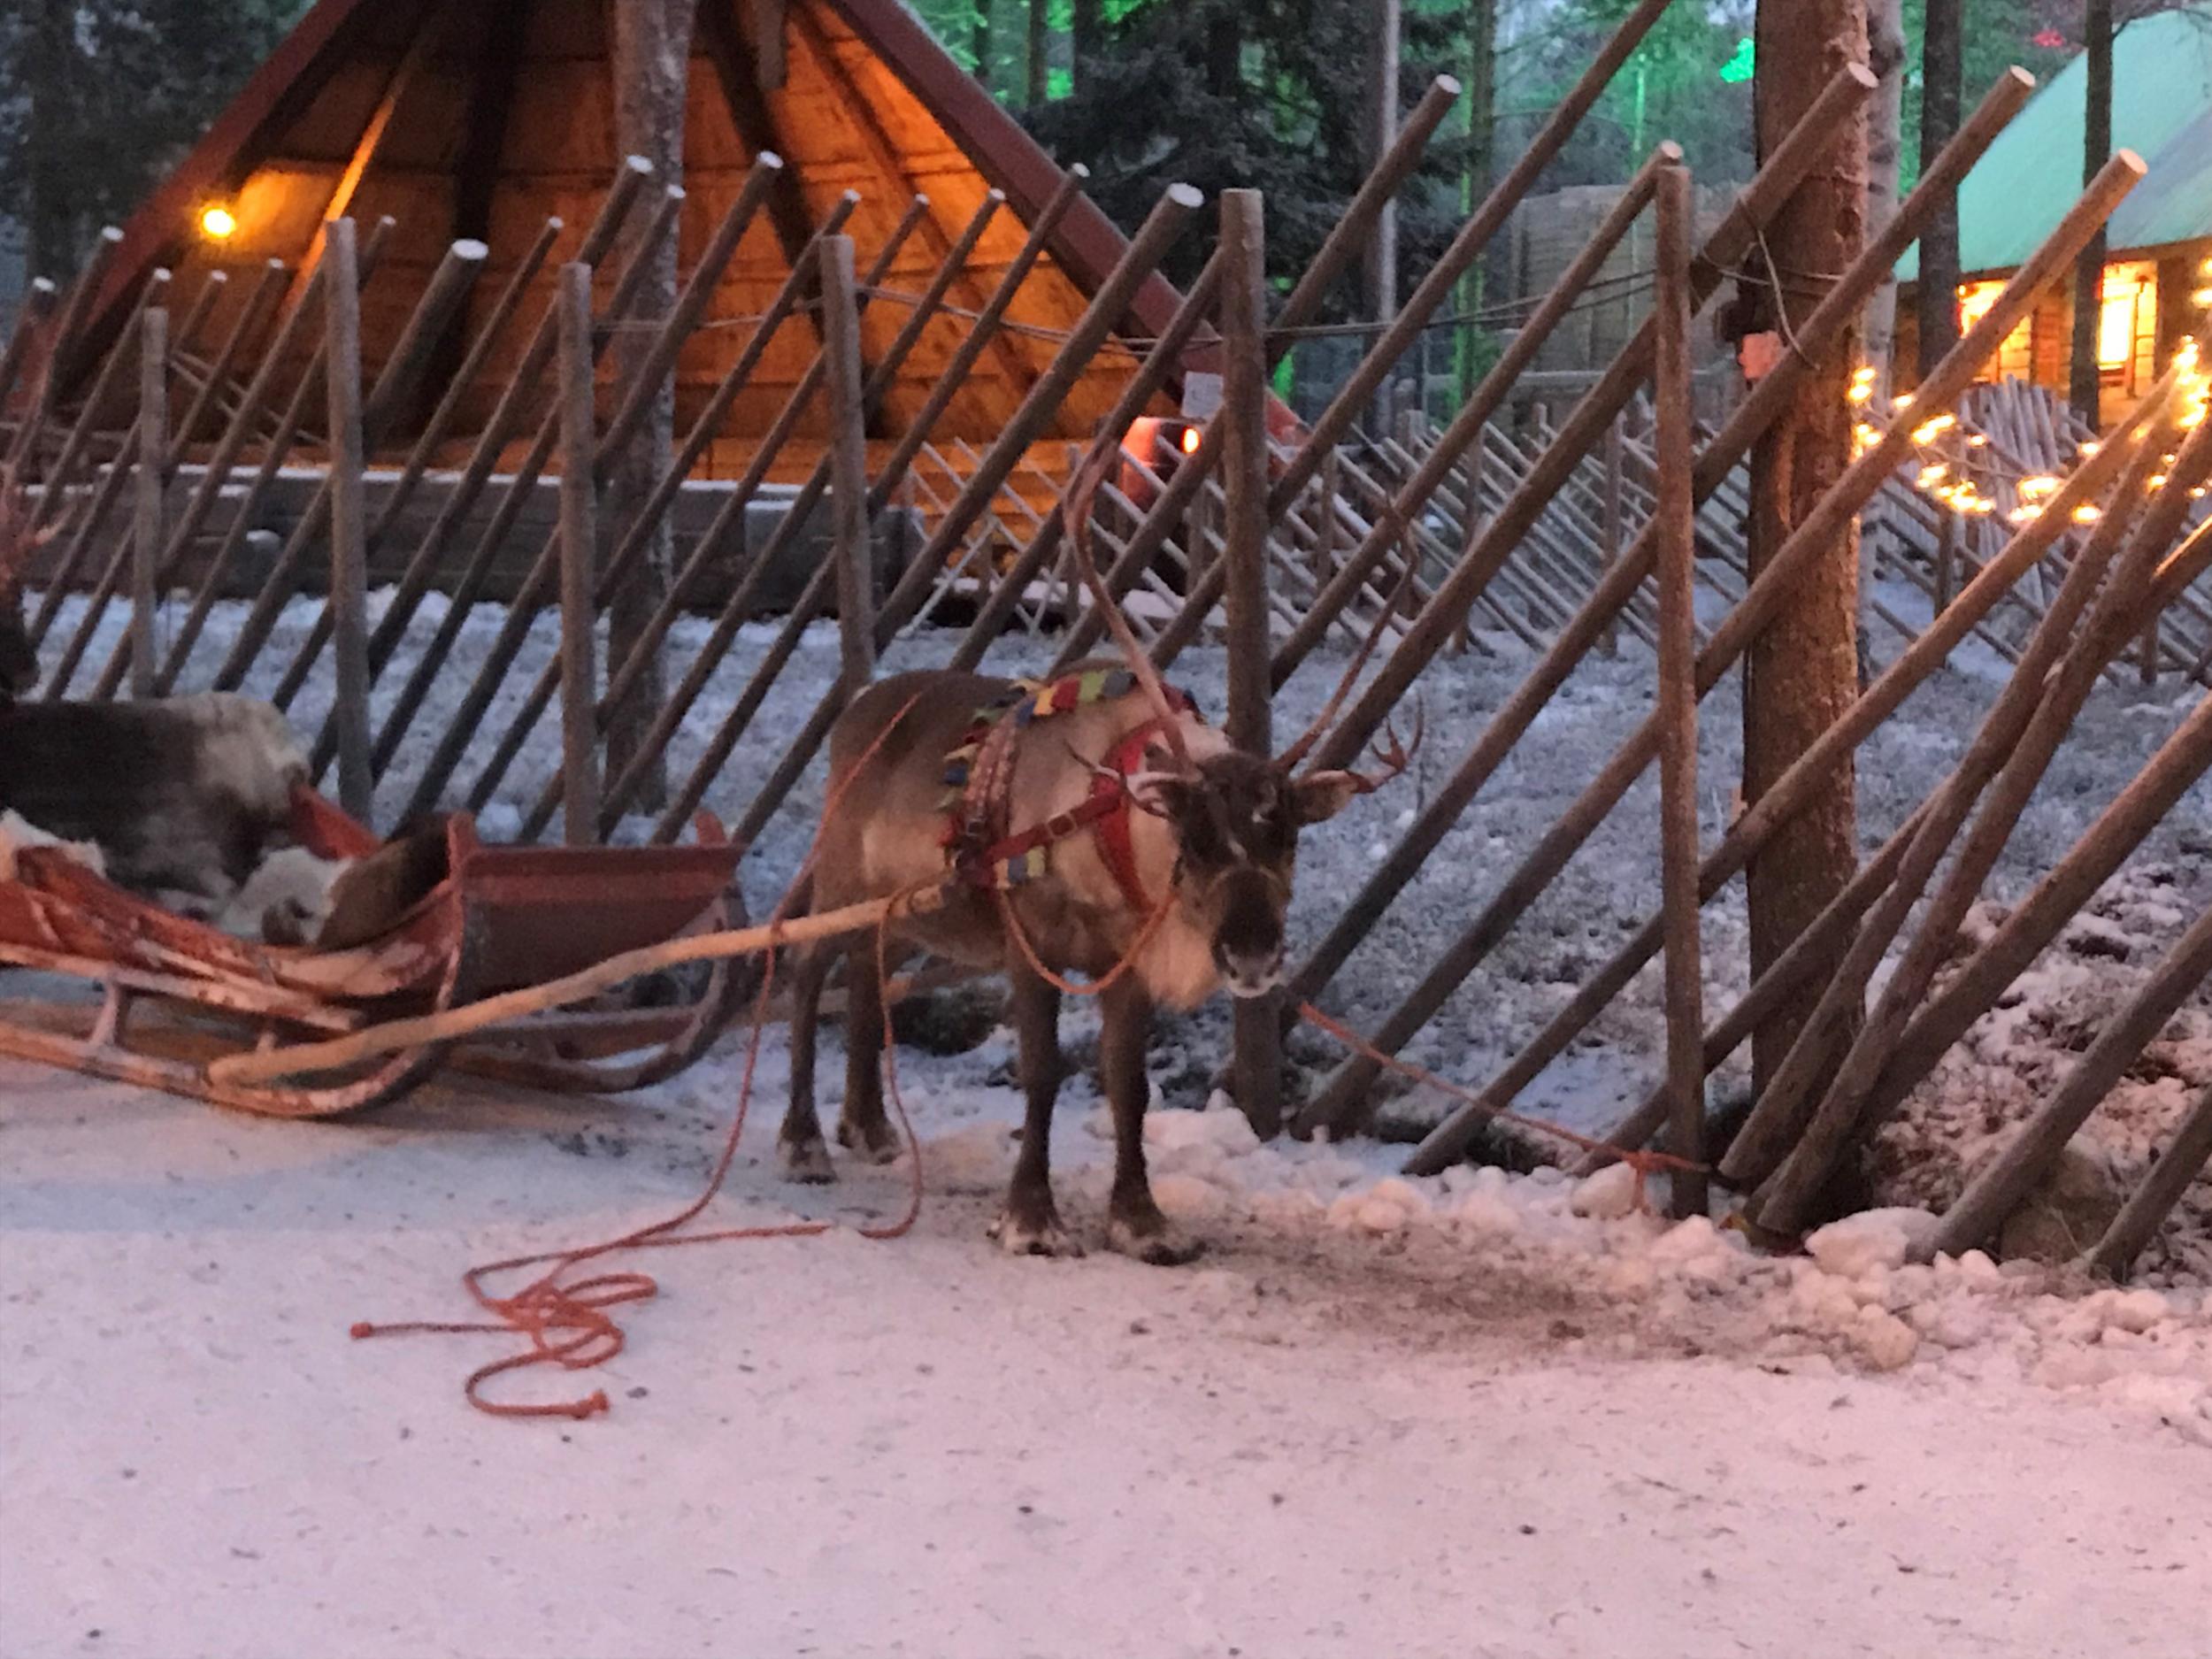 A reindeer waits on last year’s stored snow